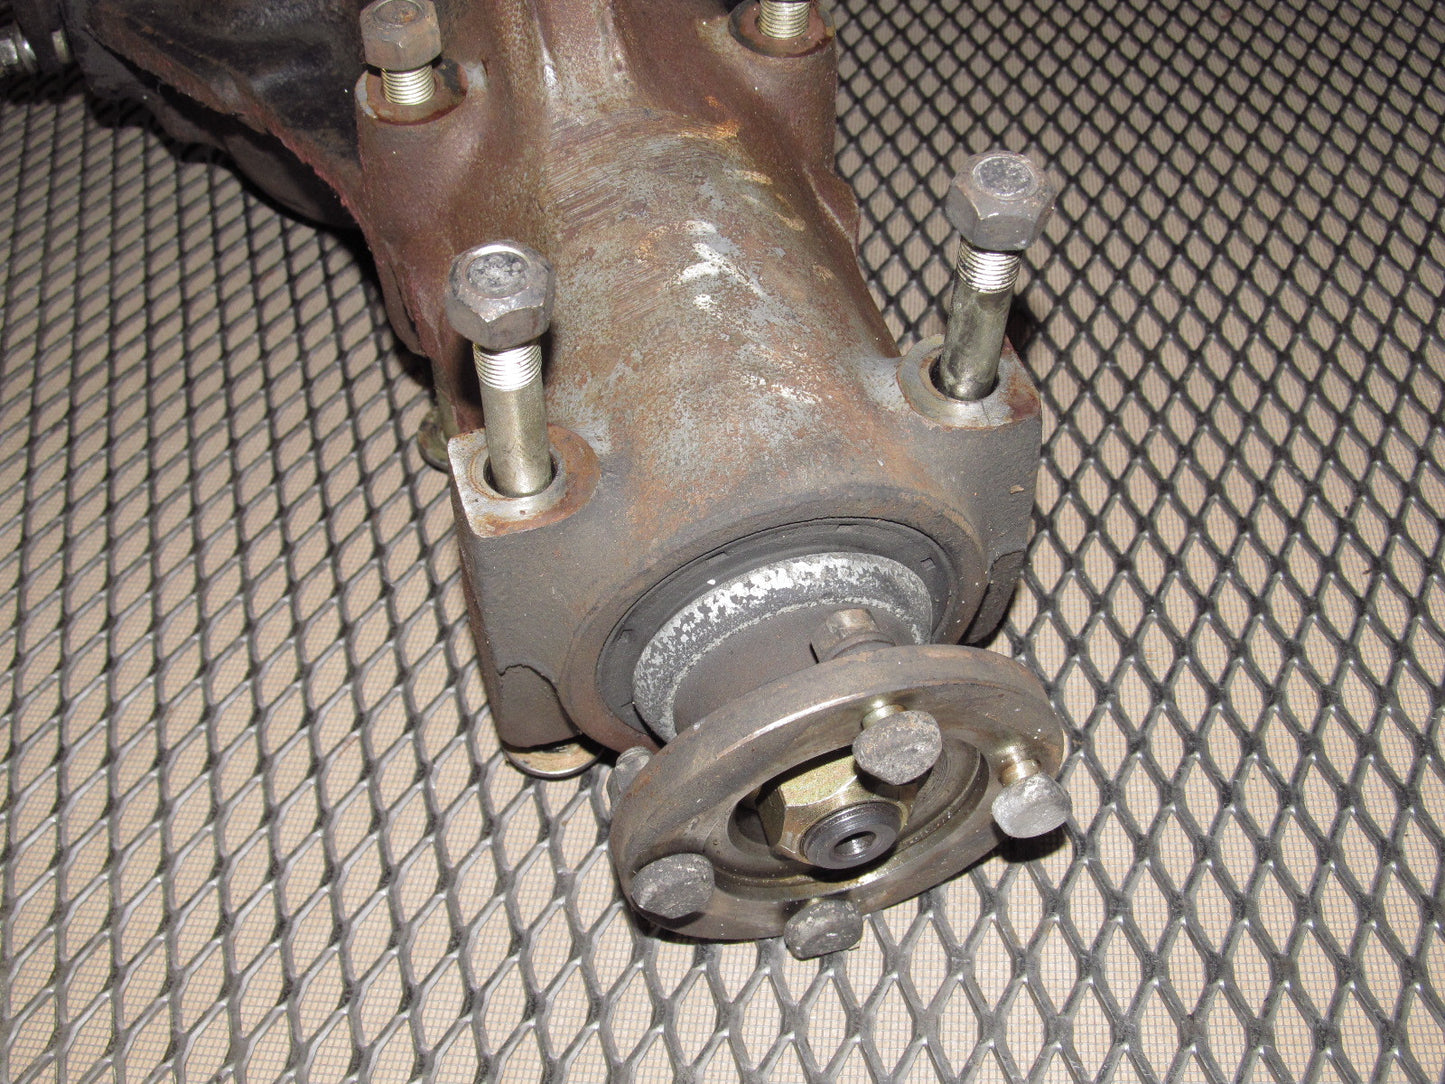 79 Datsun 280zx OEM Differential - R200 2+0 M/T 3.7